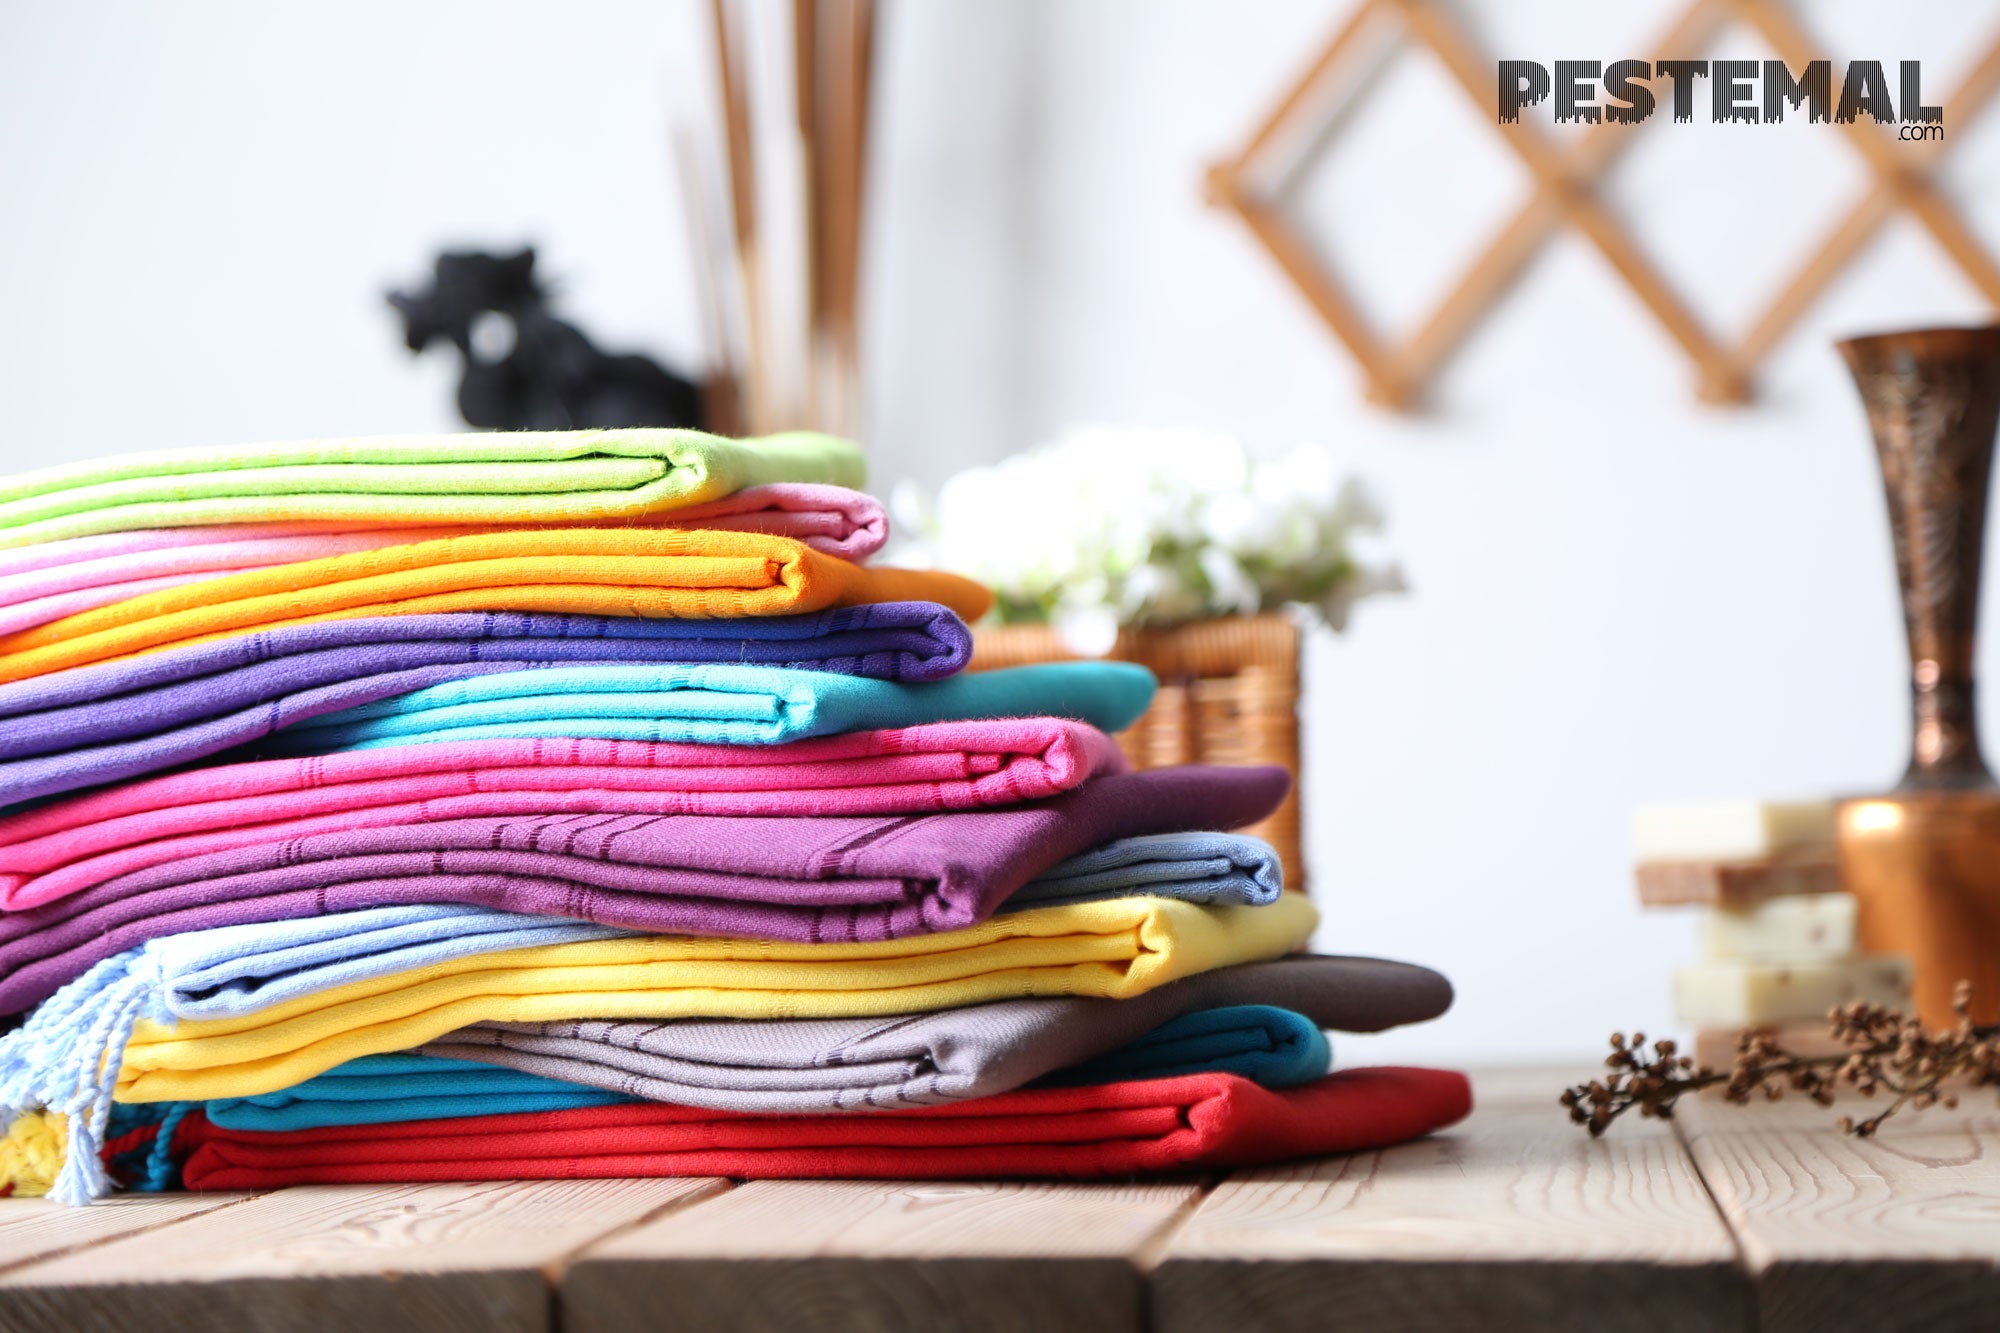 Be Part of the Summer Trend with Pestemal Towels